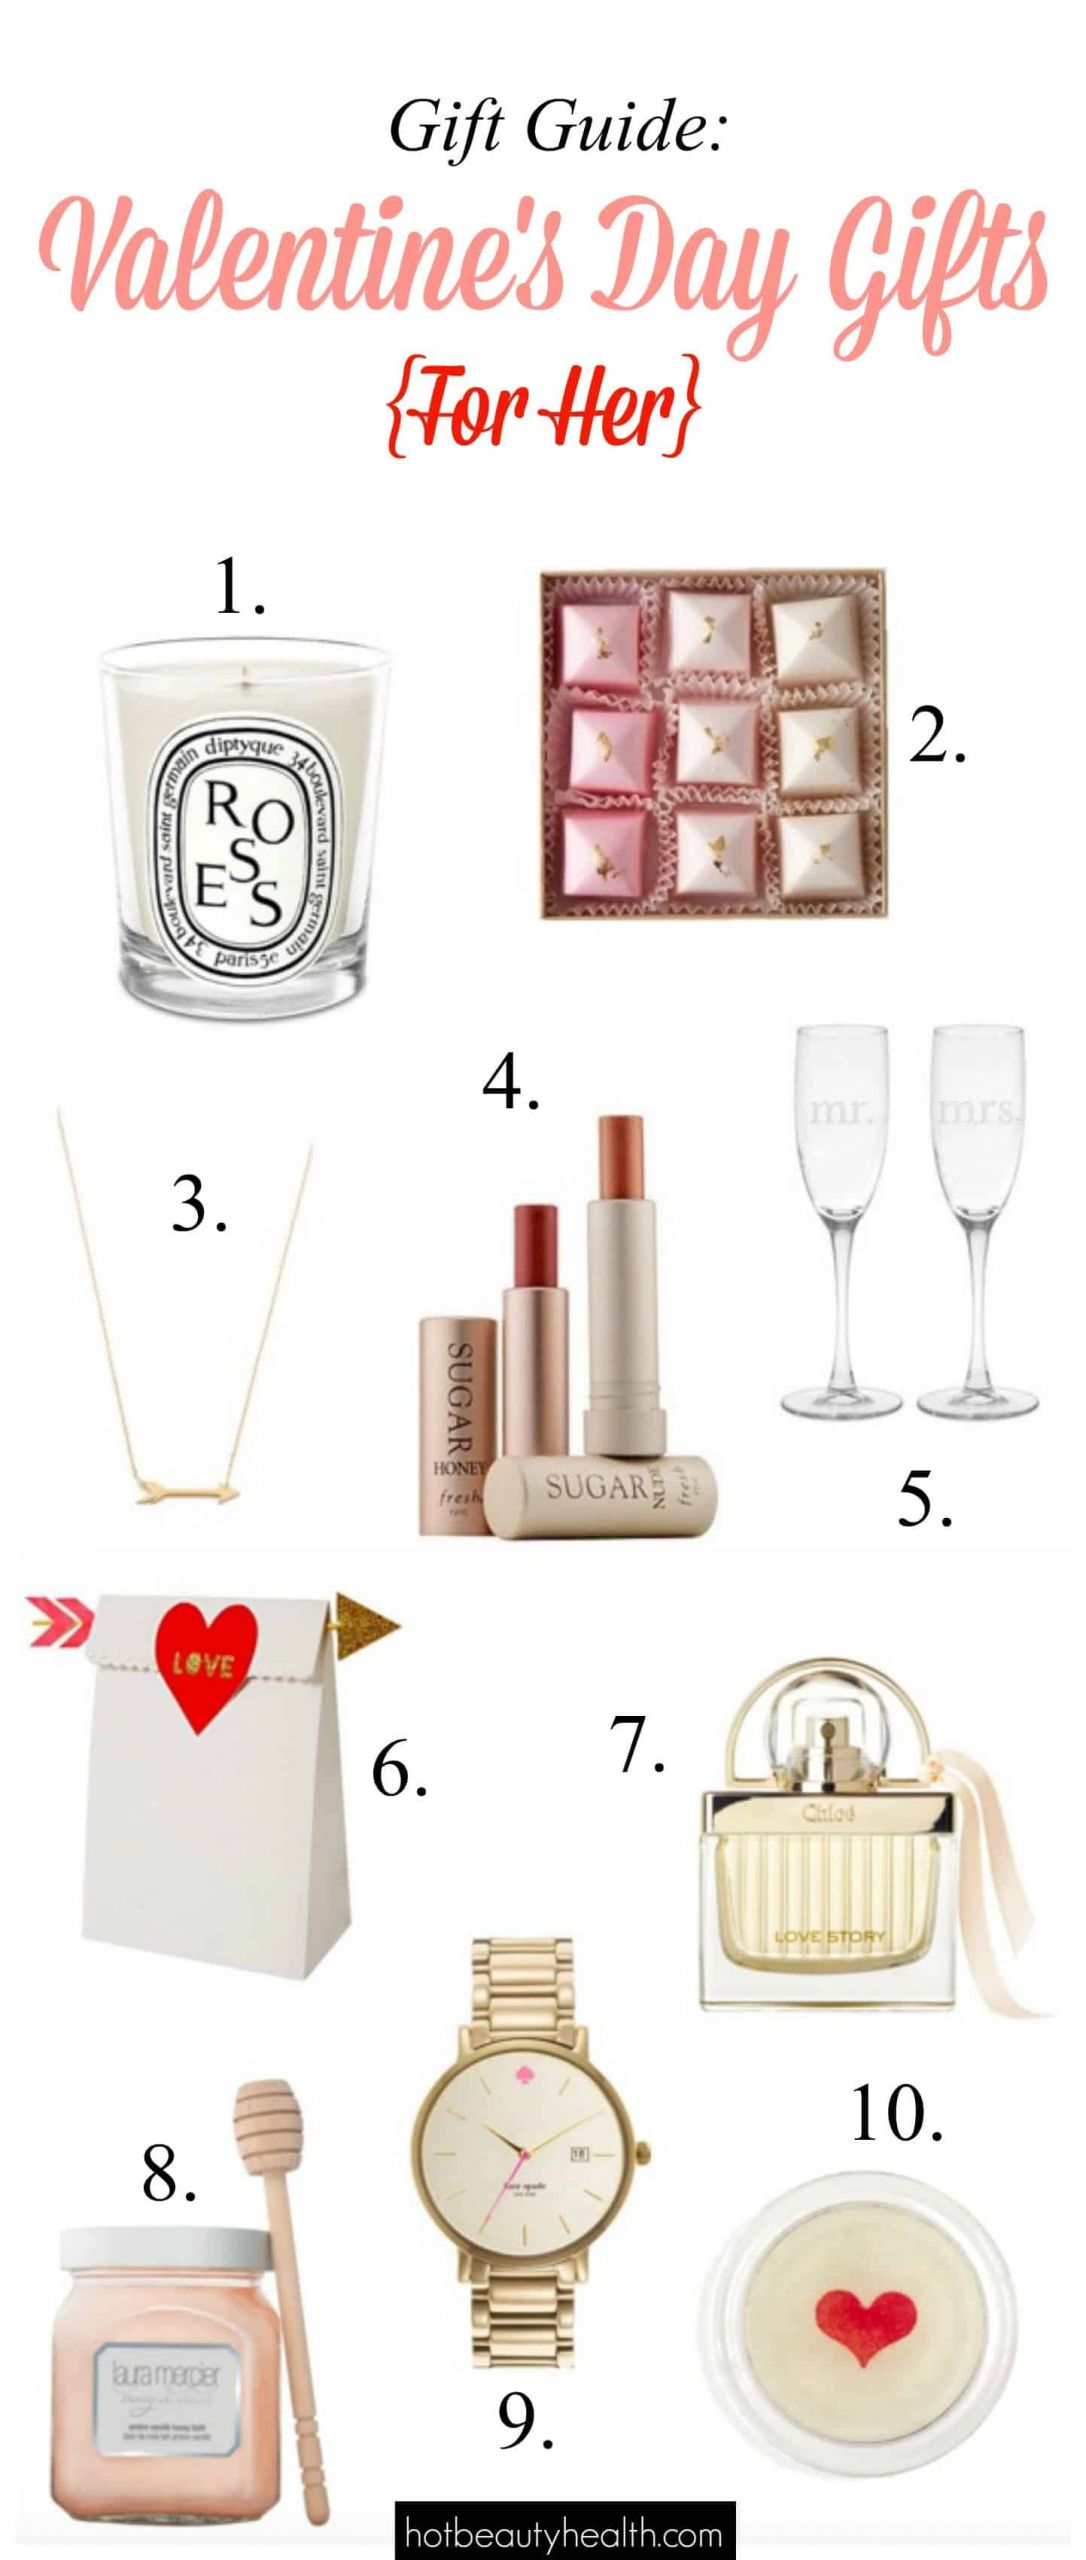 Cute Ideas For Valentines Day For Her
 10 Cute Valentine s Day Gifts for Her